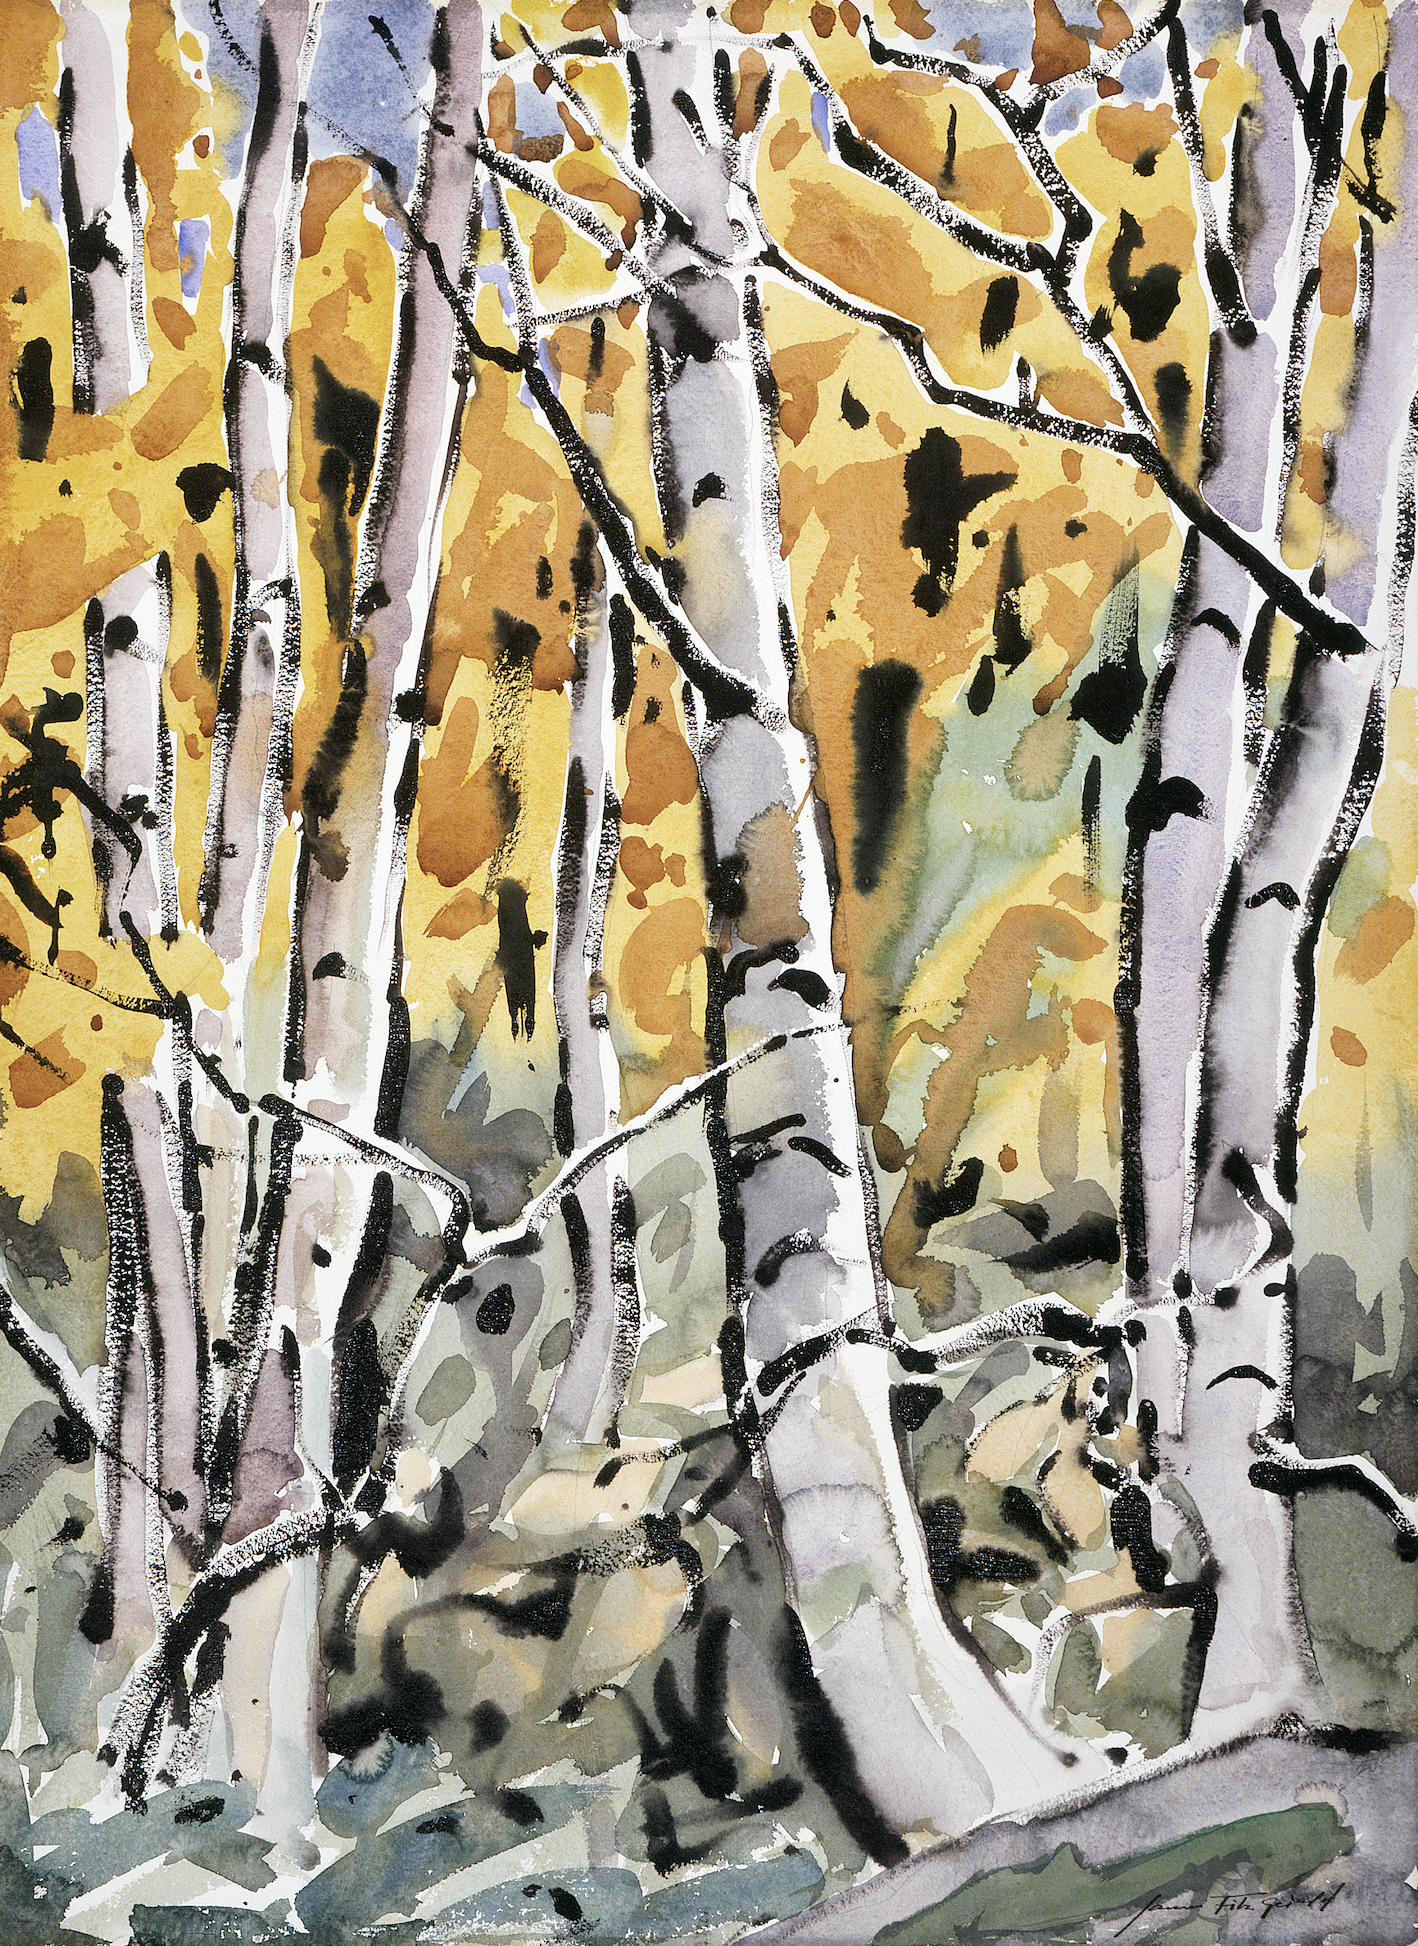 James Fitzgerald, ‘Birches, Katahdin,’ circa 1952. Watercolor and Chinese ink on paper, 30-1/2 by 22-1/2in., James Fitzgerald Legacy, MMA&H